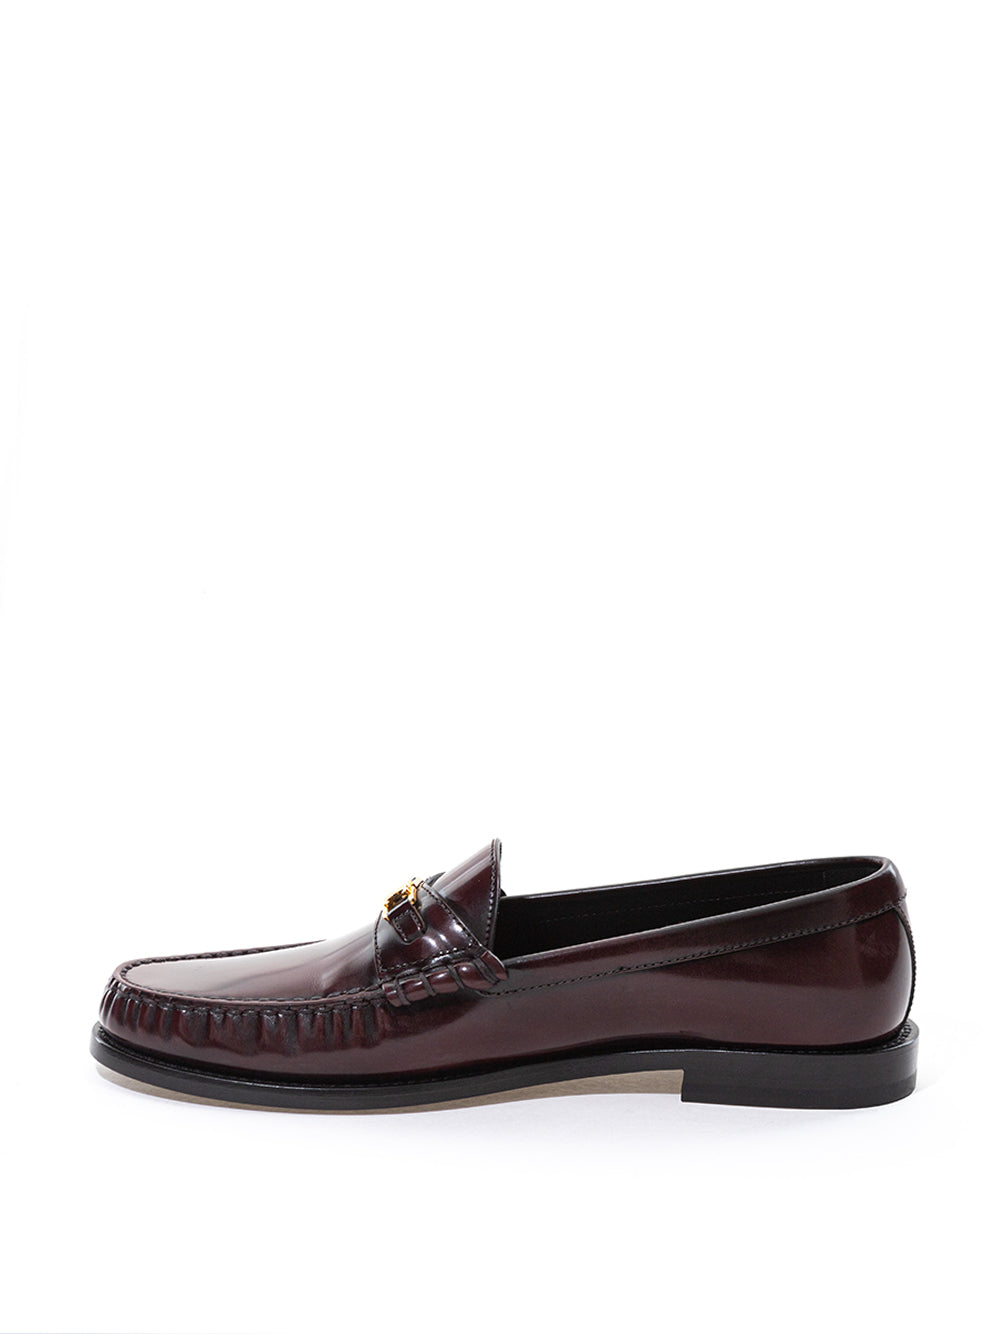 Celine Triomphe Moccasin in Brown Leather